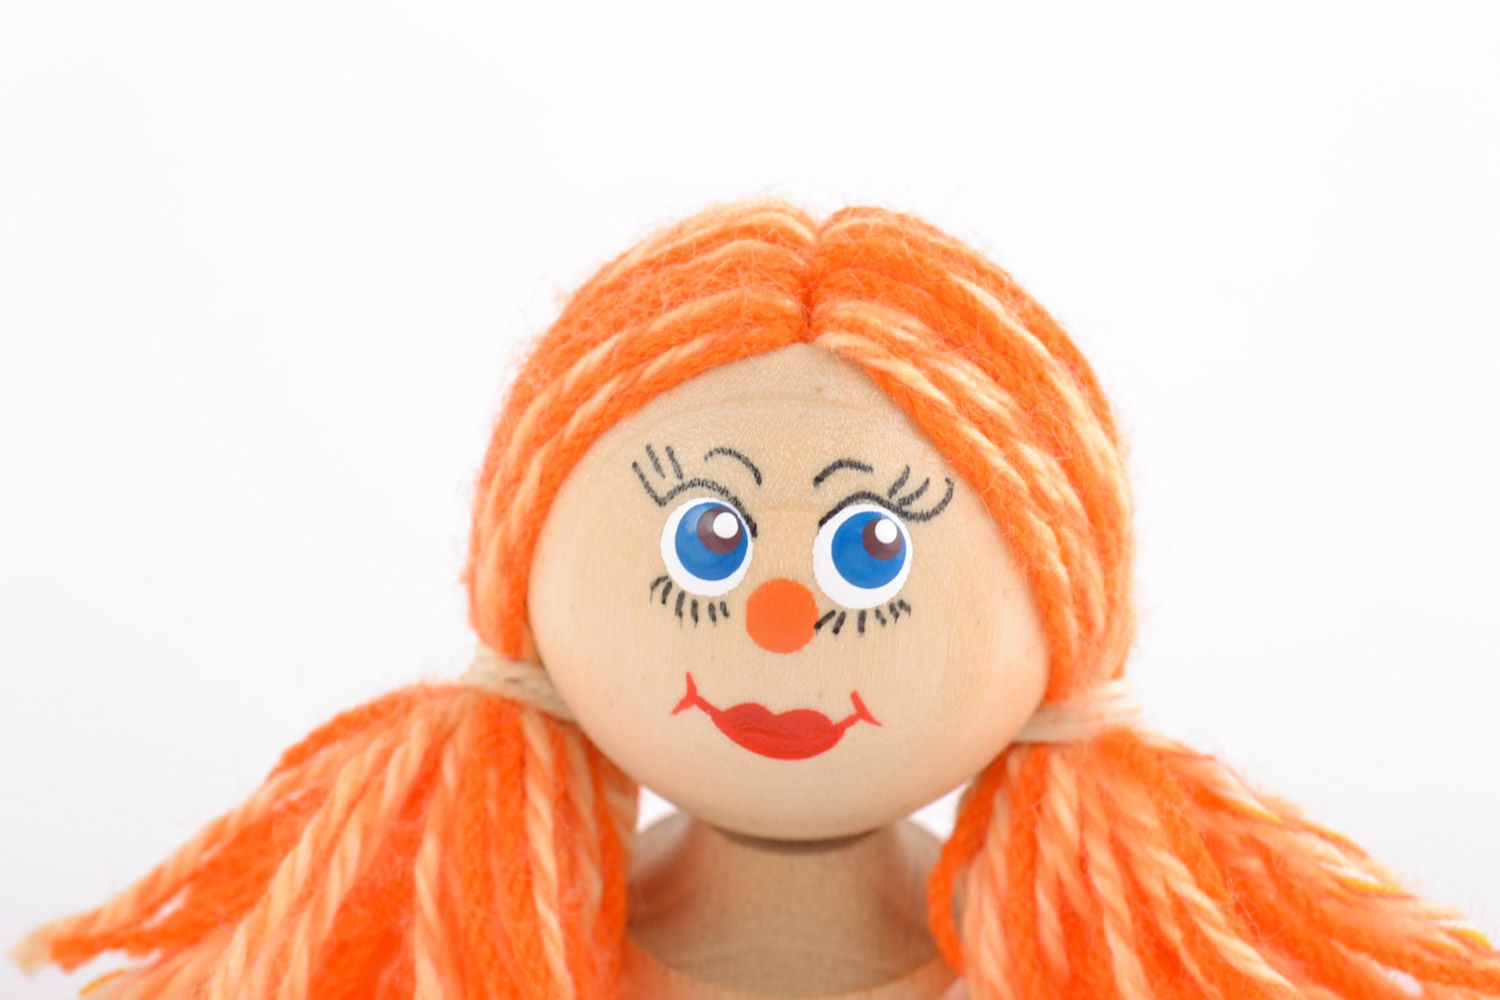 Handmade decorative wooden toy girl with red hair eco friendly toy for children photo 3